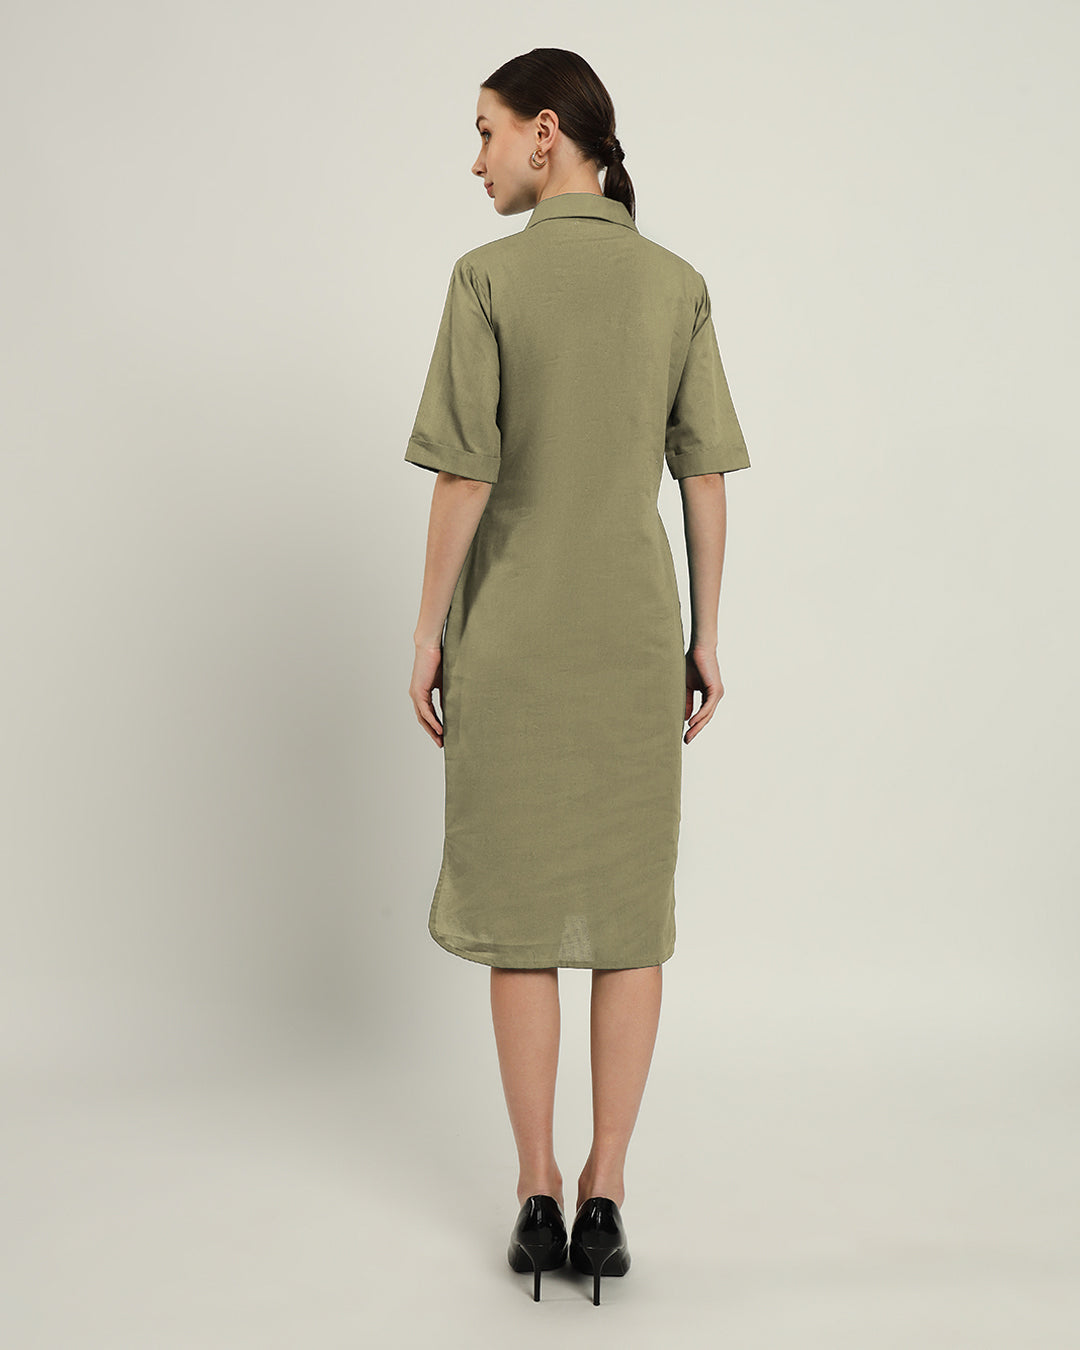 The Tampa Daisy Olive Linen Dress